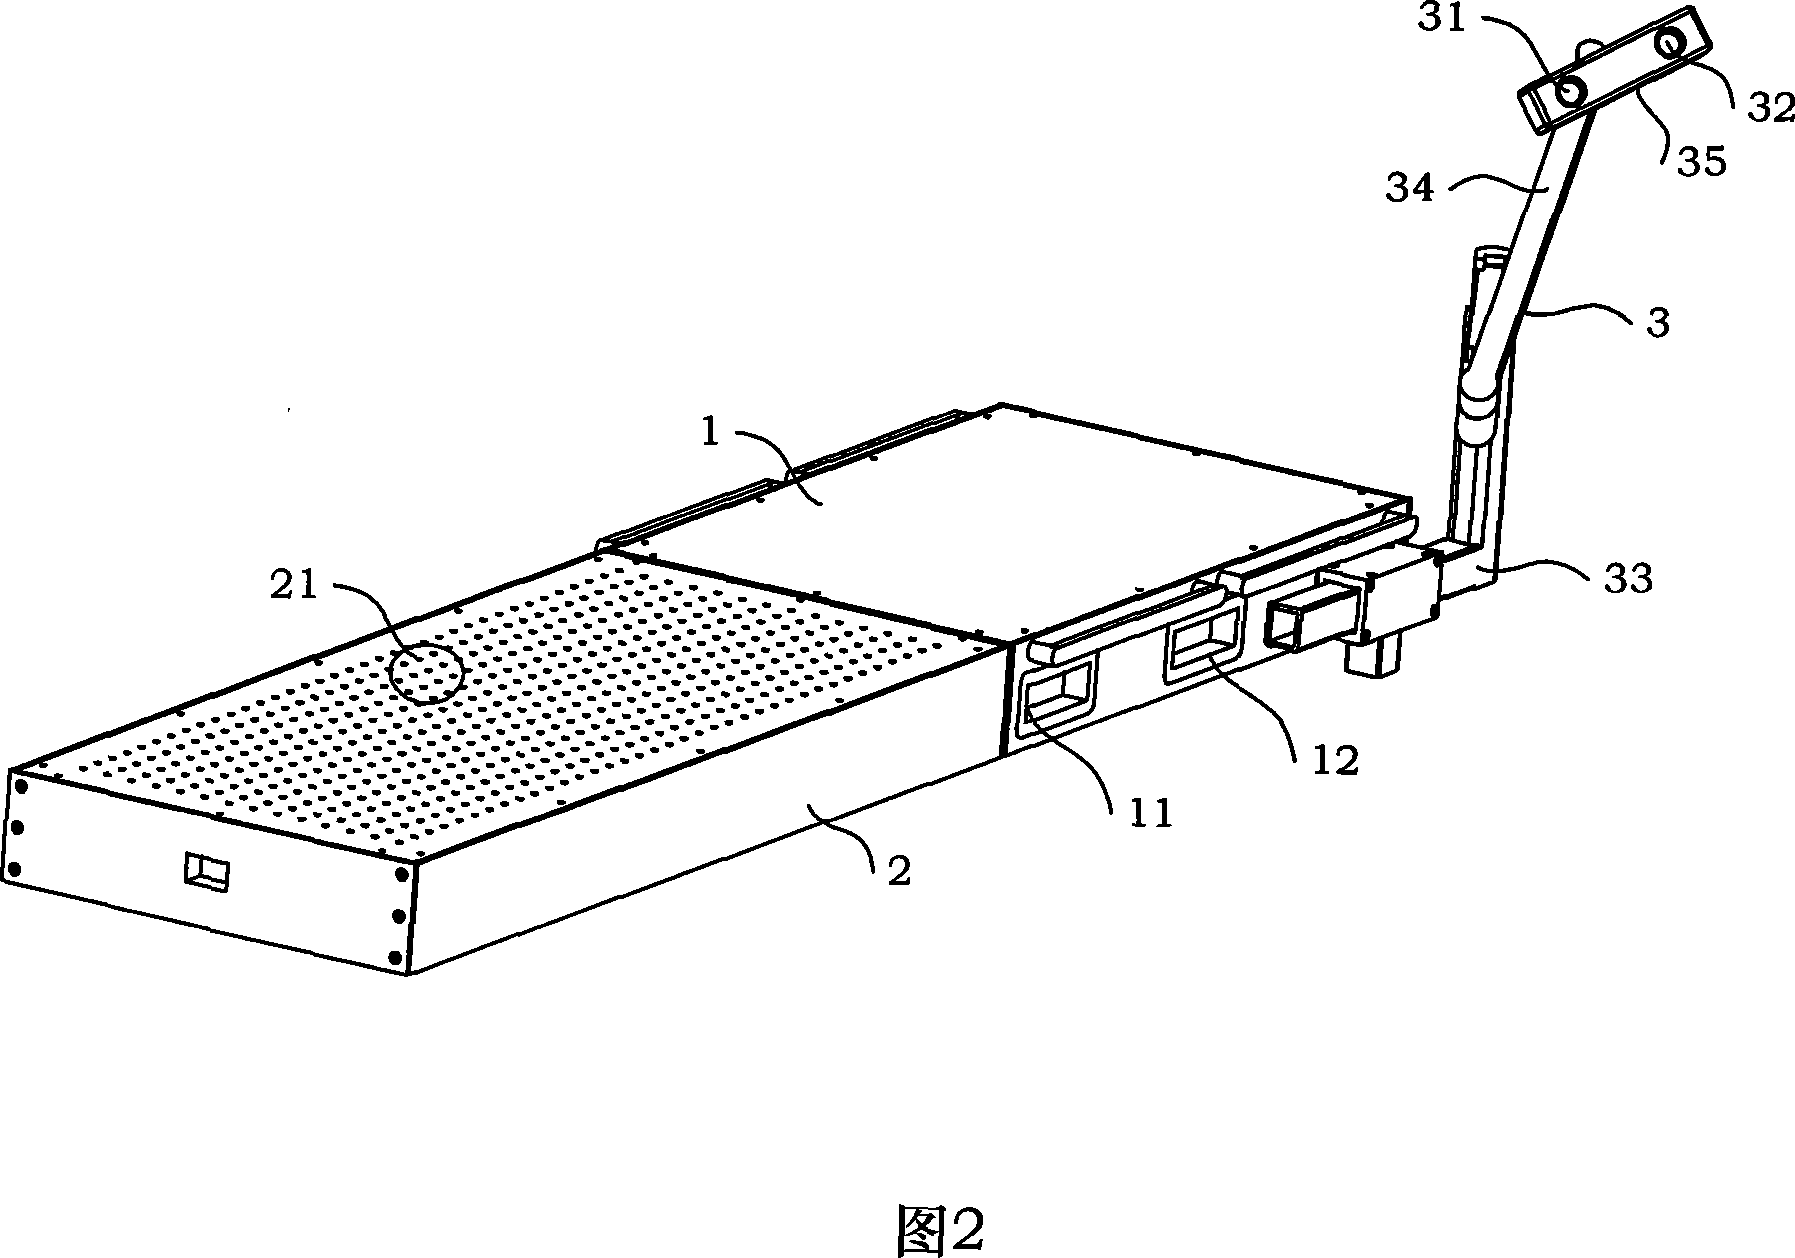 Digital operating bed system with double-plane positioning and double-eyes visual tracting